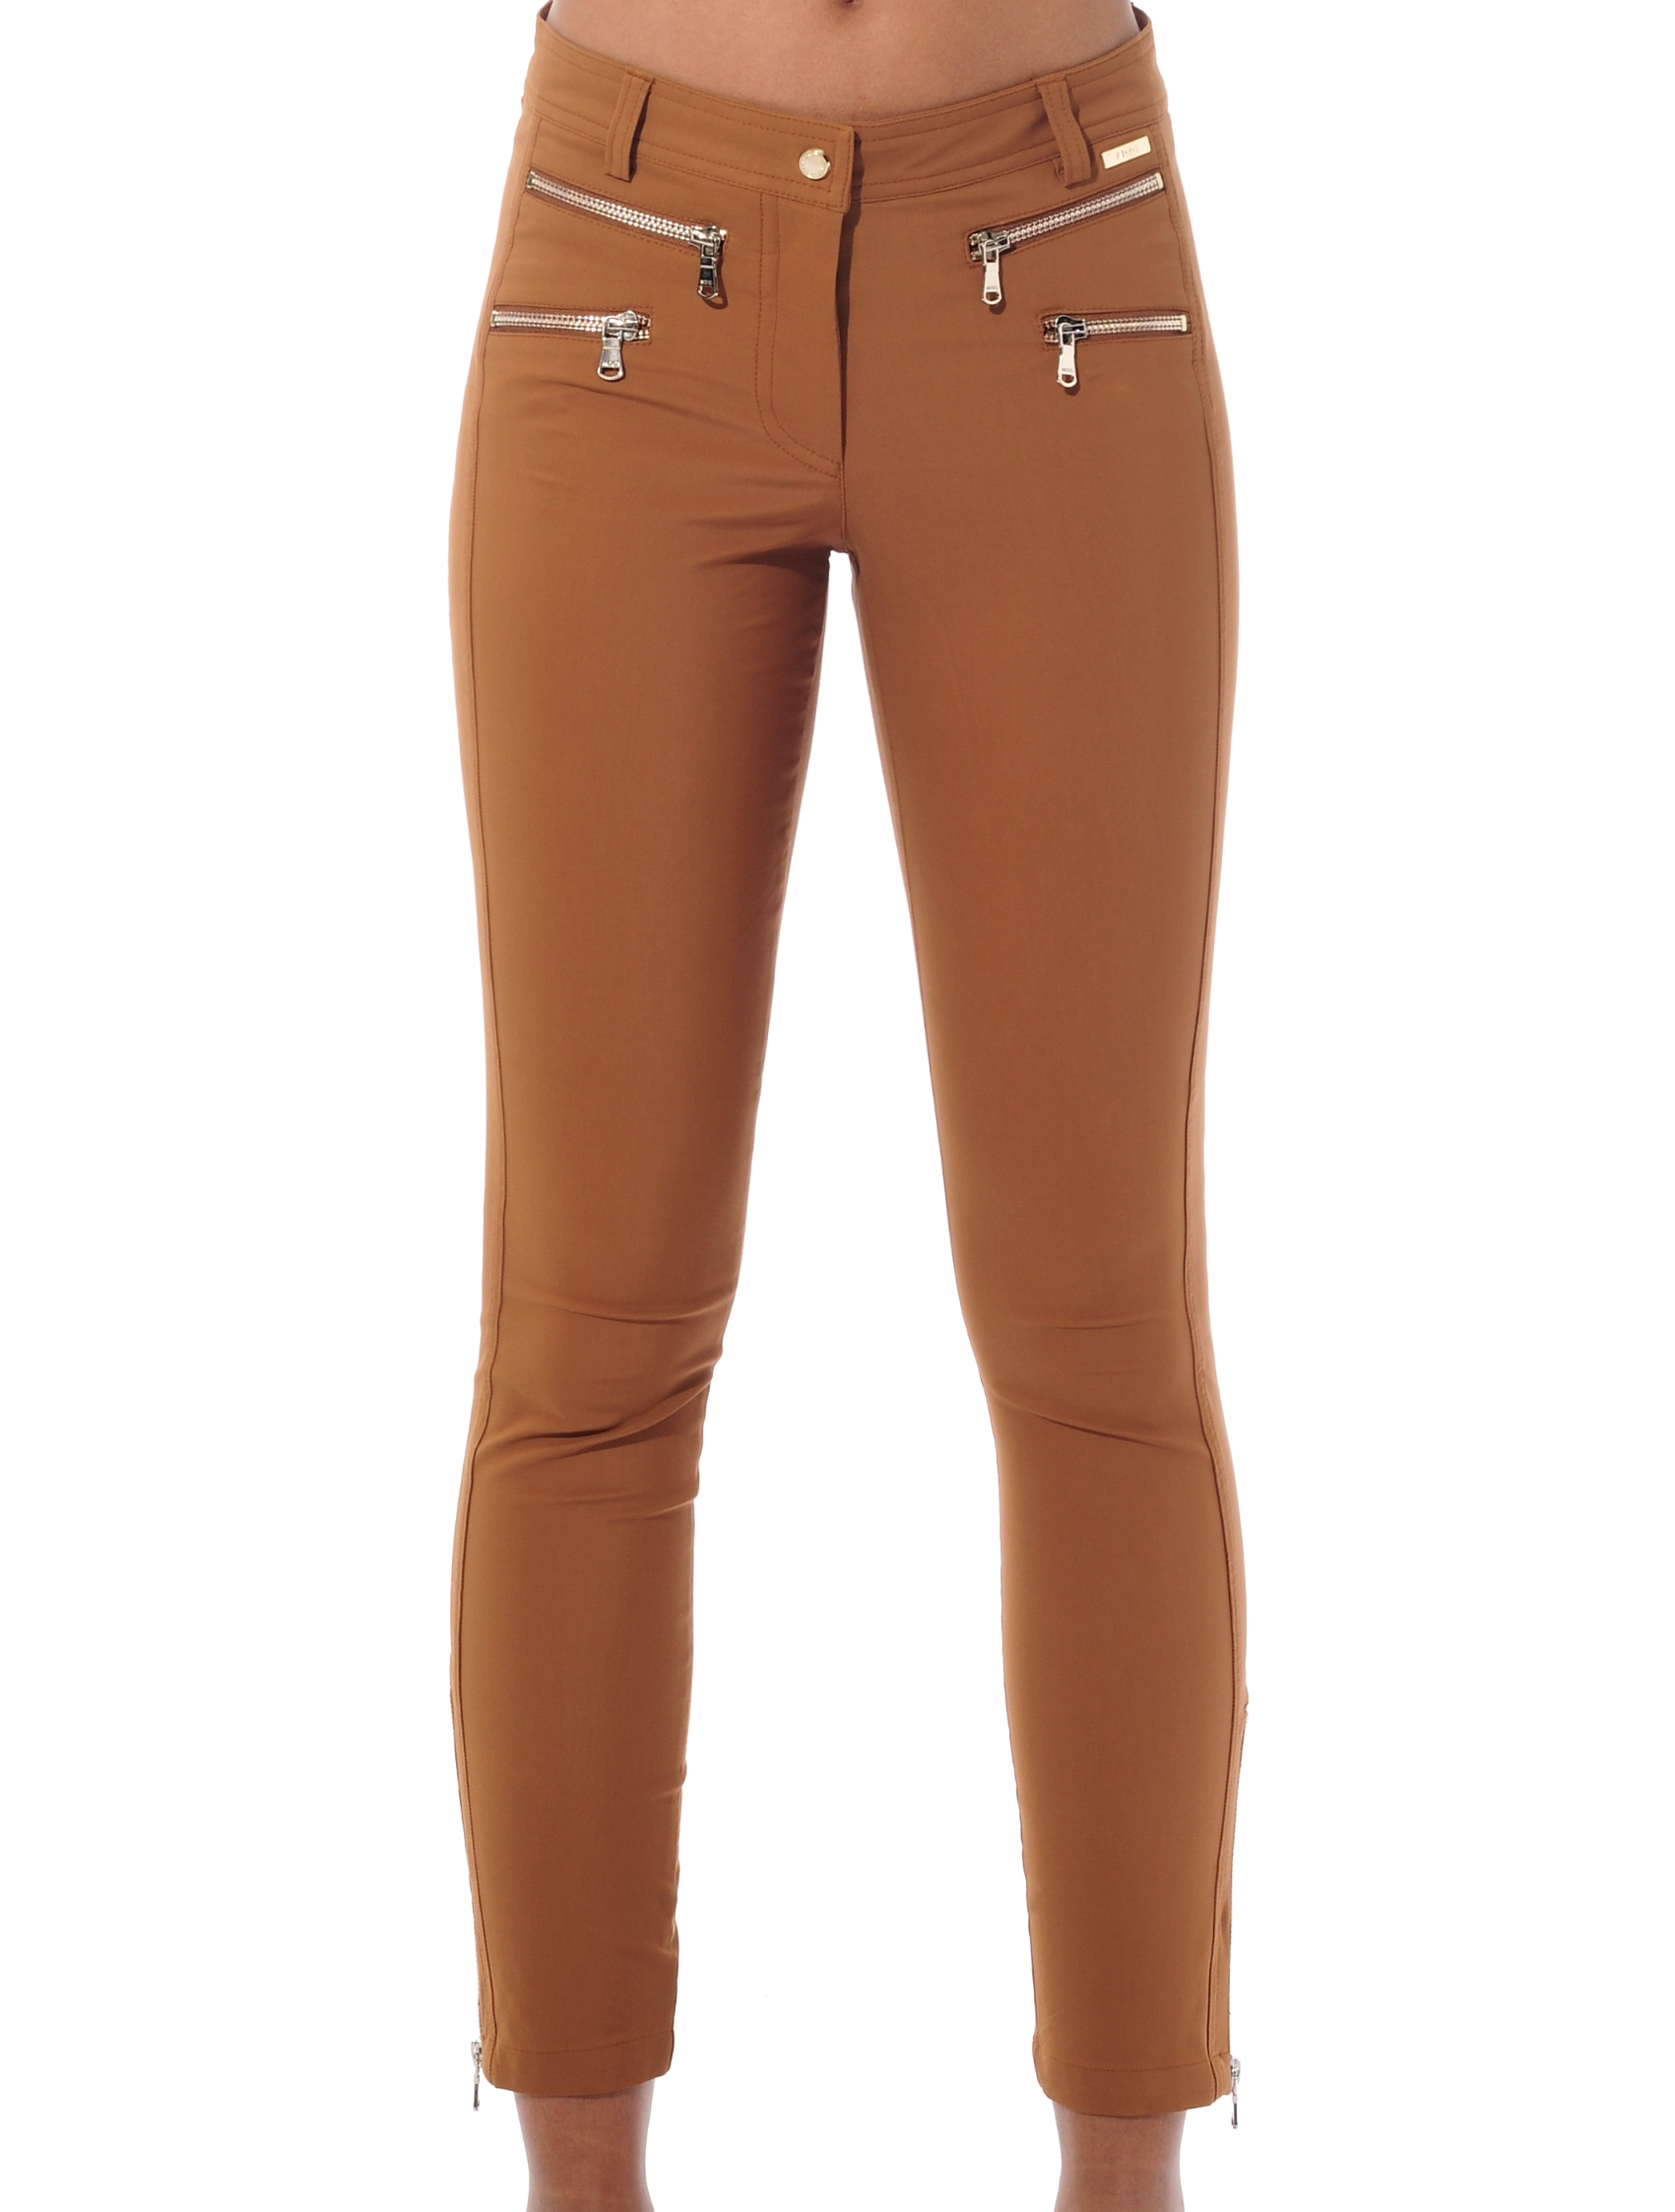 4way stretch double zip ankle pants ocre 